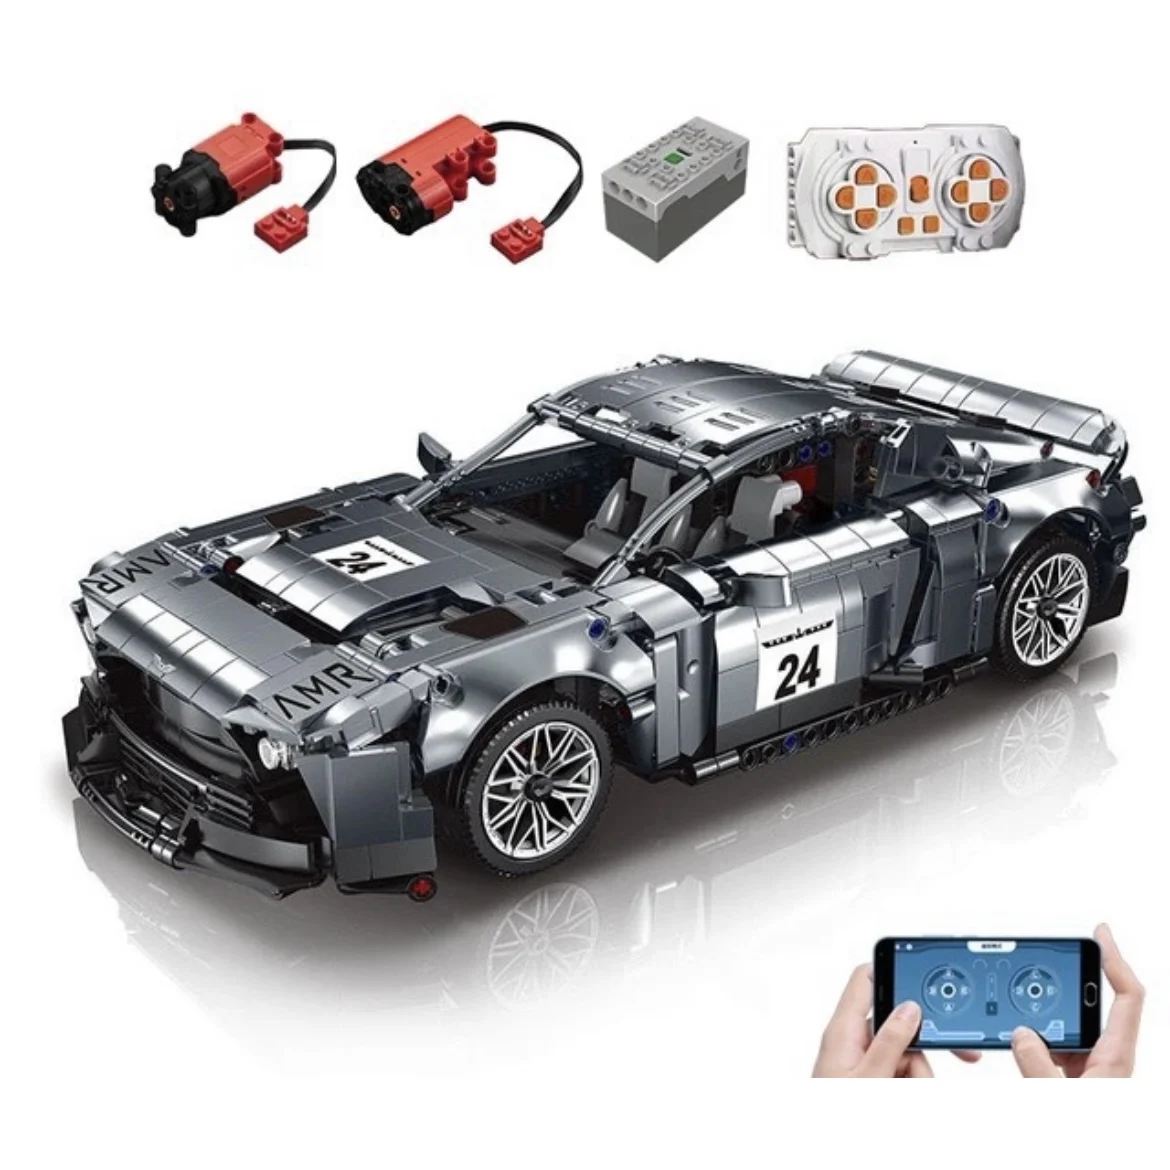 

City Technical Martined Victor Silver Speed Racing Car Building Block MOC Model Supercar Vehicle Bricks Toys For Kids Gifts